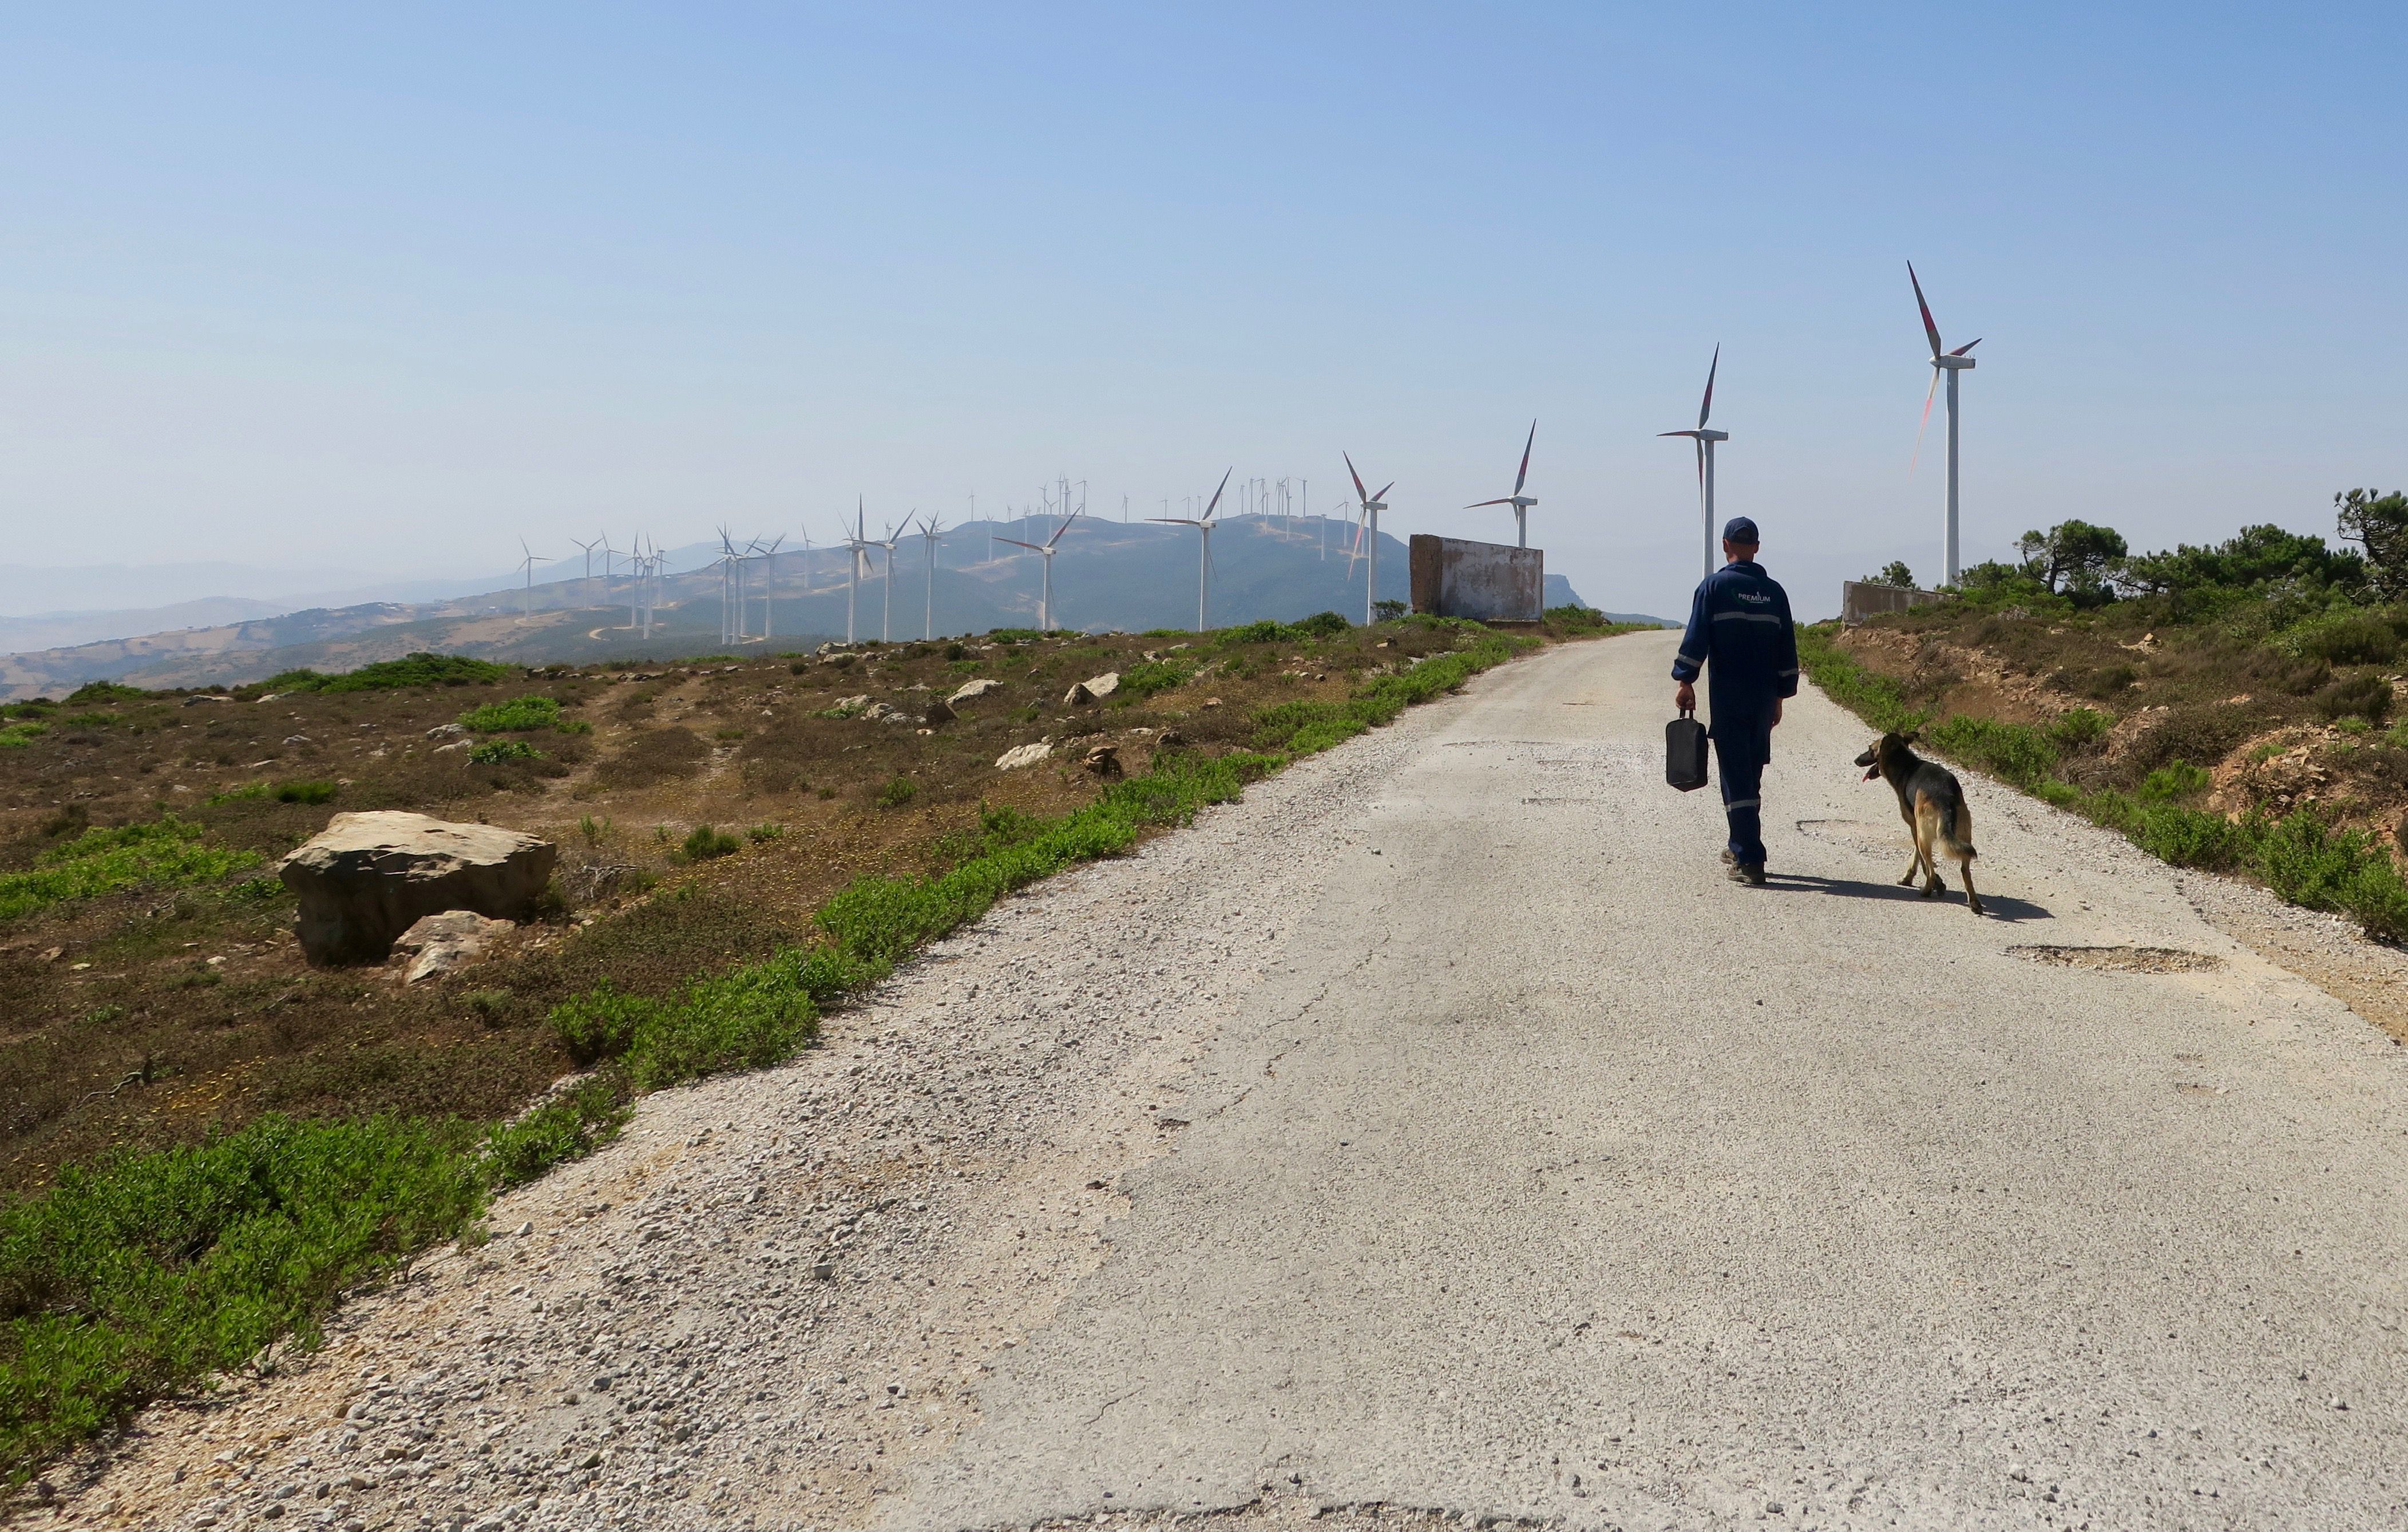 A security guard patrols the Dhar Saadane wind farm with his dog. The farm has 126 turbines, which line the mountains above Tangier, Morocco. Wind power from farms in Tangier provide 2.5 percent of the country’s electrical energy. Image by Jackie Spinner. Morocco, 2017.